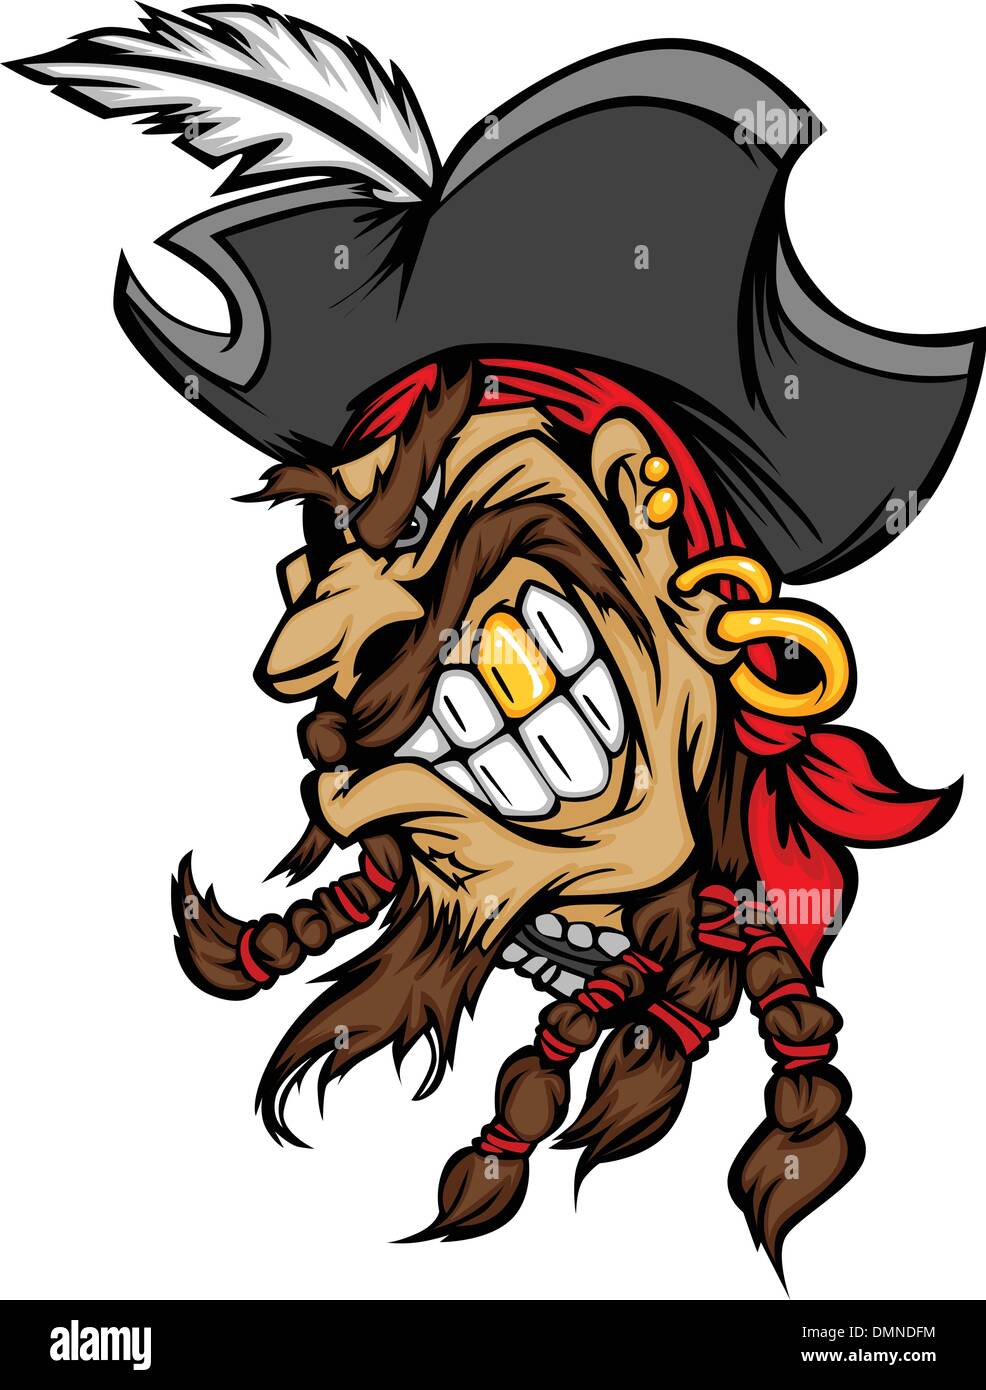 Pirate Mascot with Hat Cartoon Vector Image Stock Vector